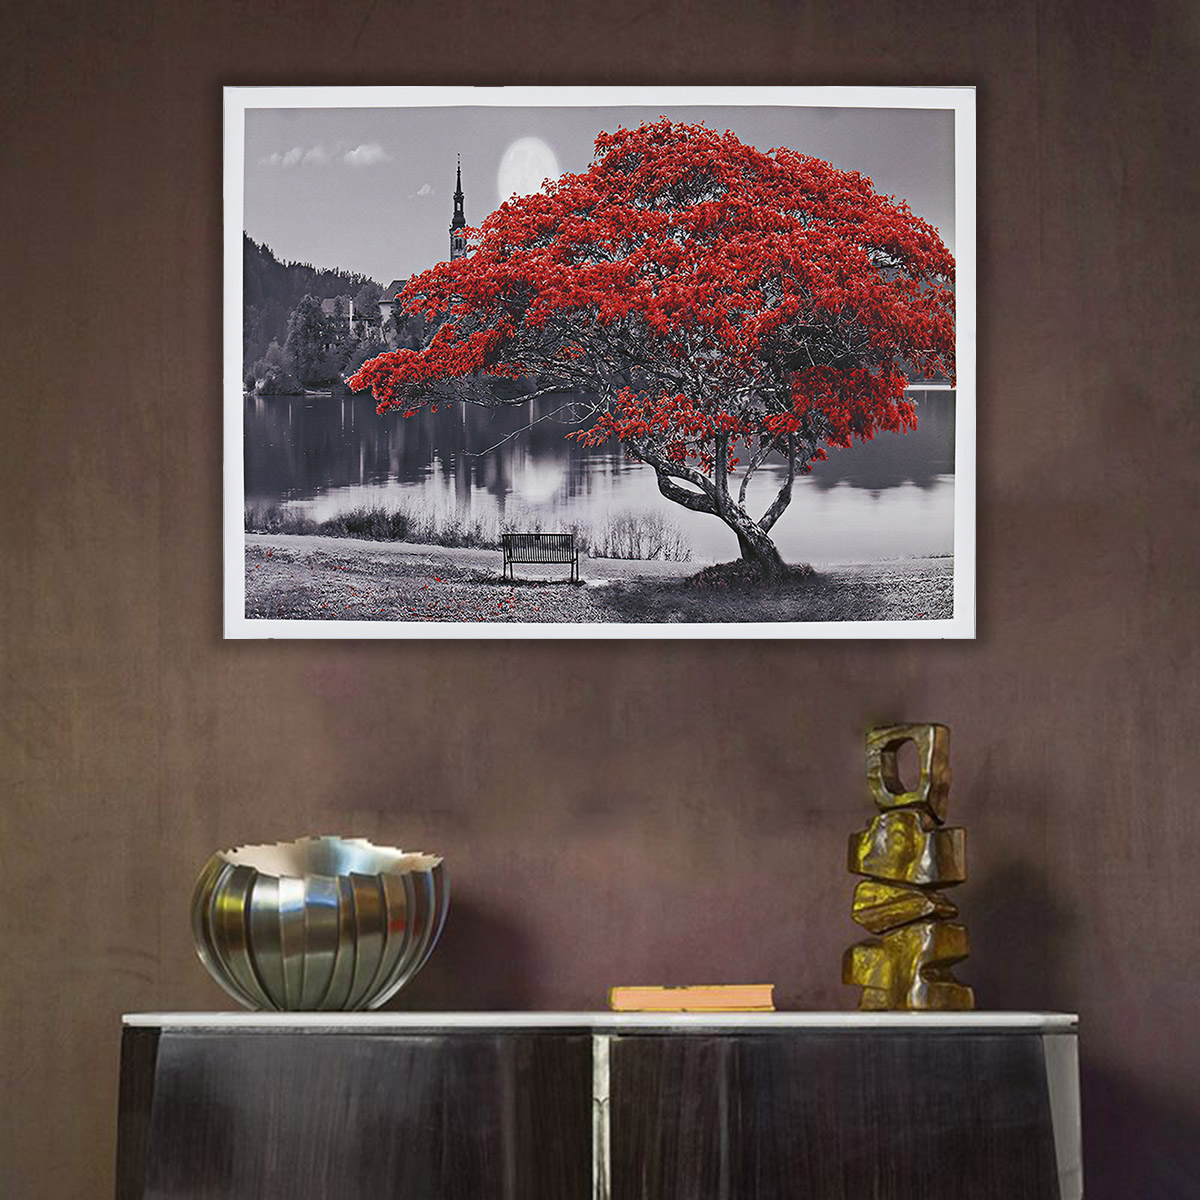 1-Piece-Big-Tree-Canvas-Painting-Wall-Decorative-Print-Art-Picture-Unframed-Wall-Hanging-Home-Office-1785043-13